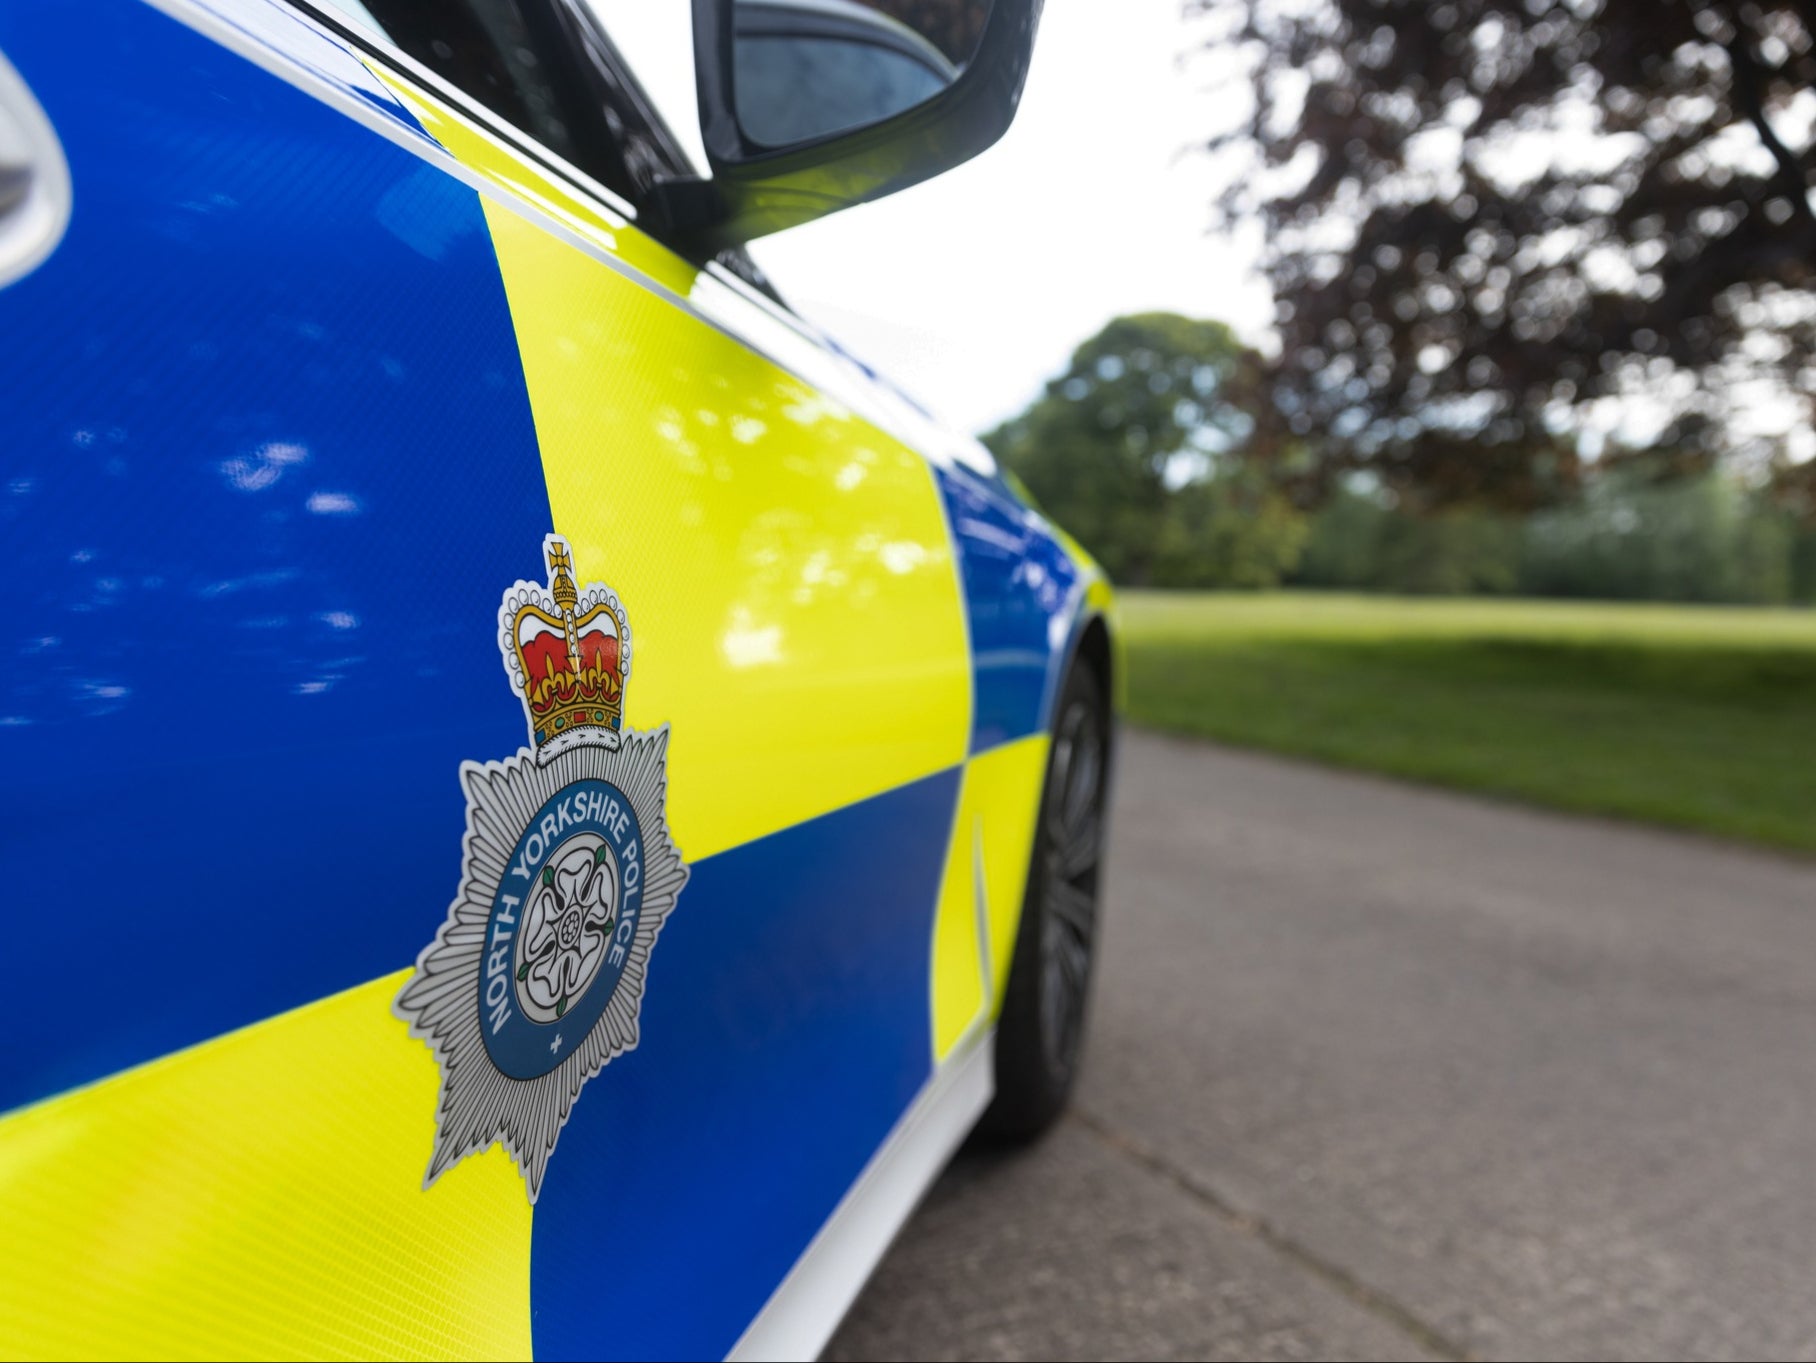 Police are appealing for witnesses after the fatal incident (file image)